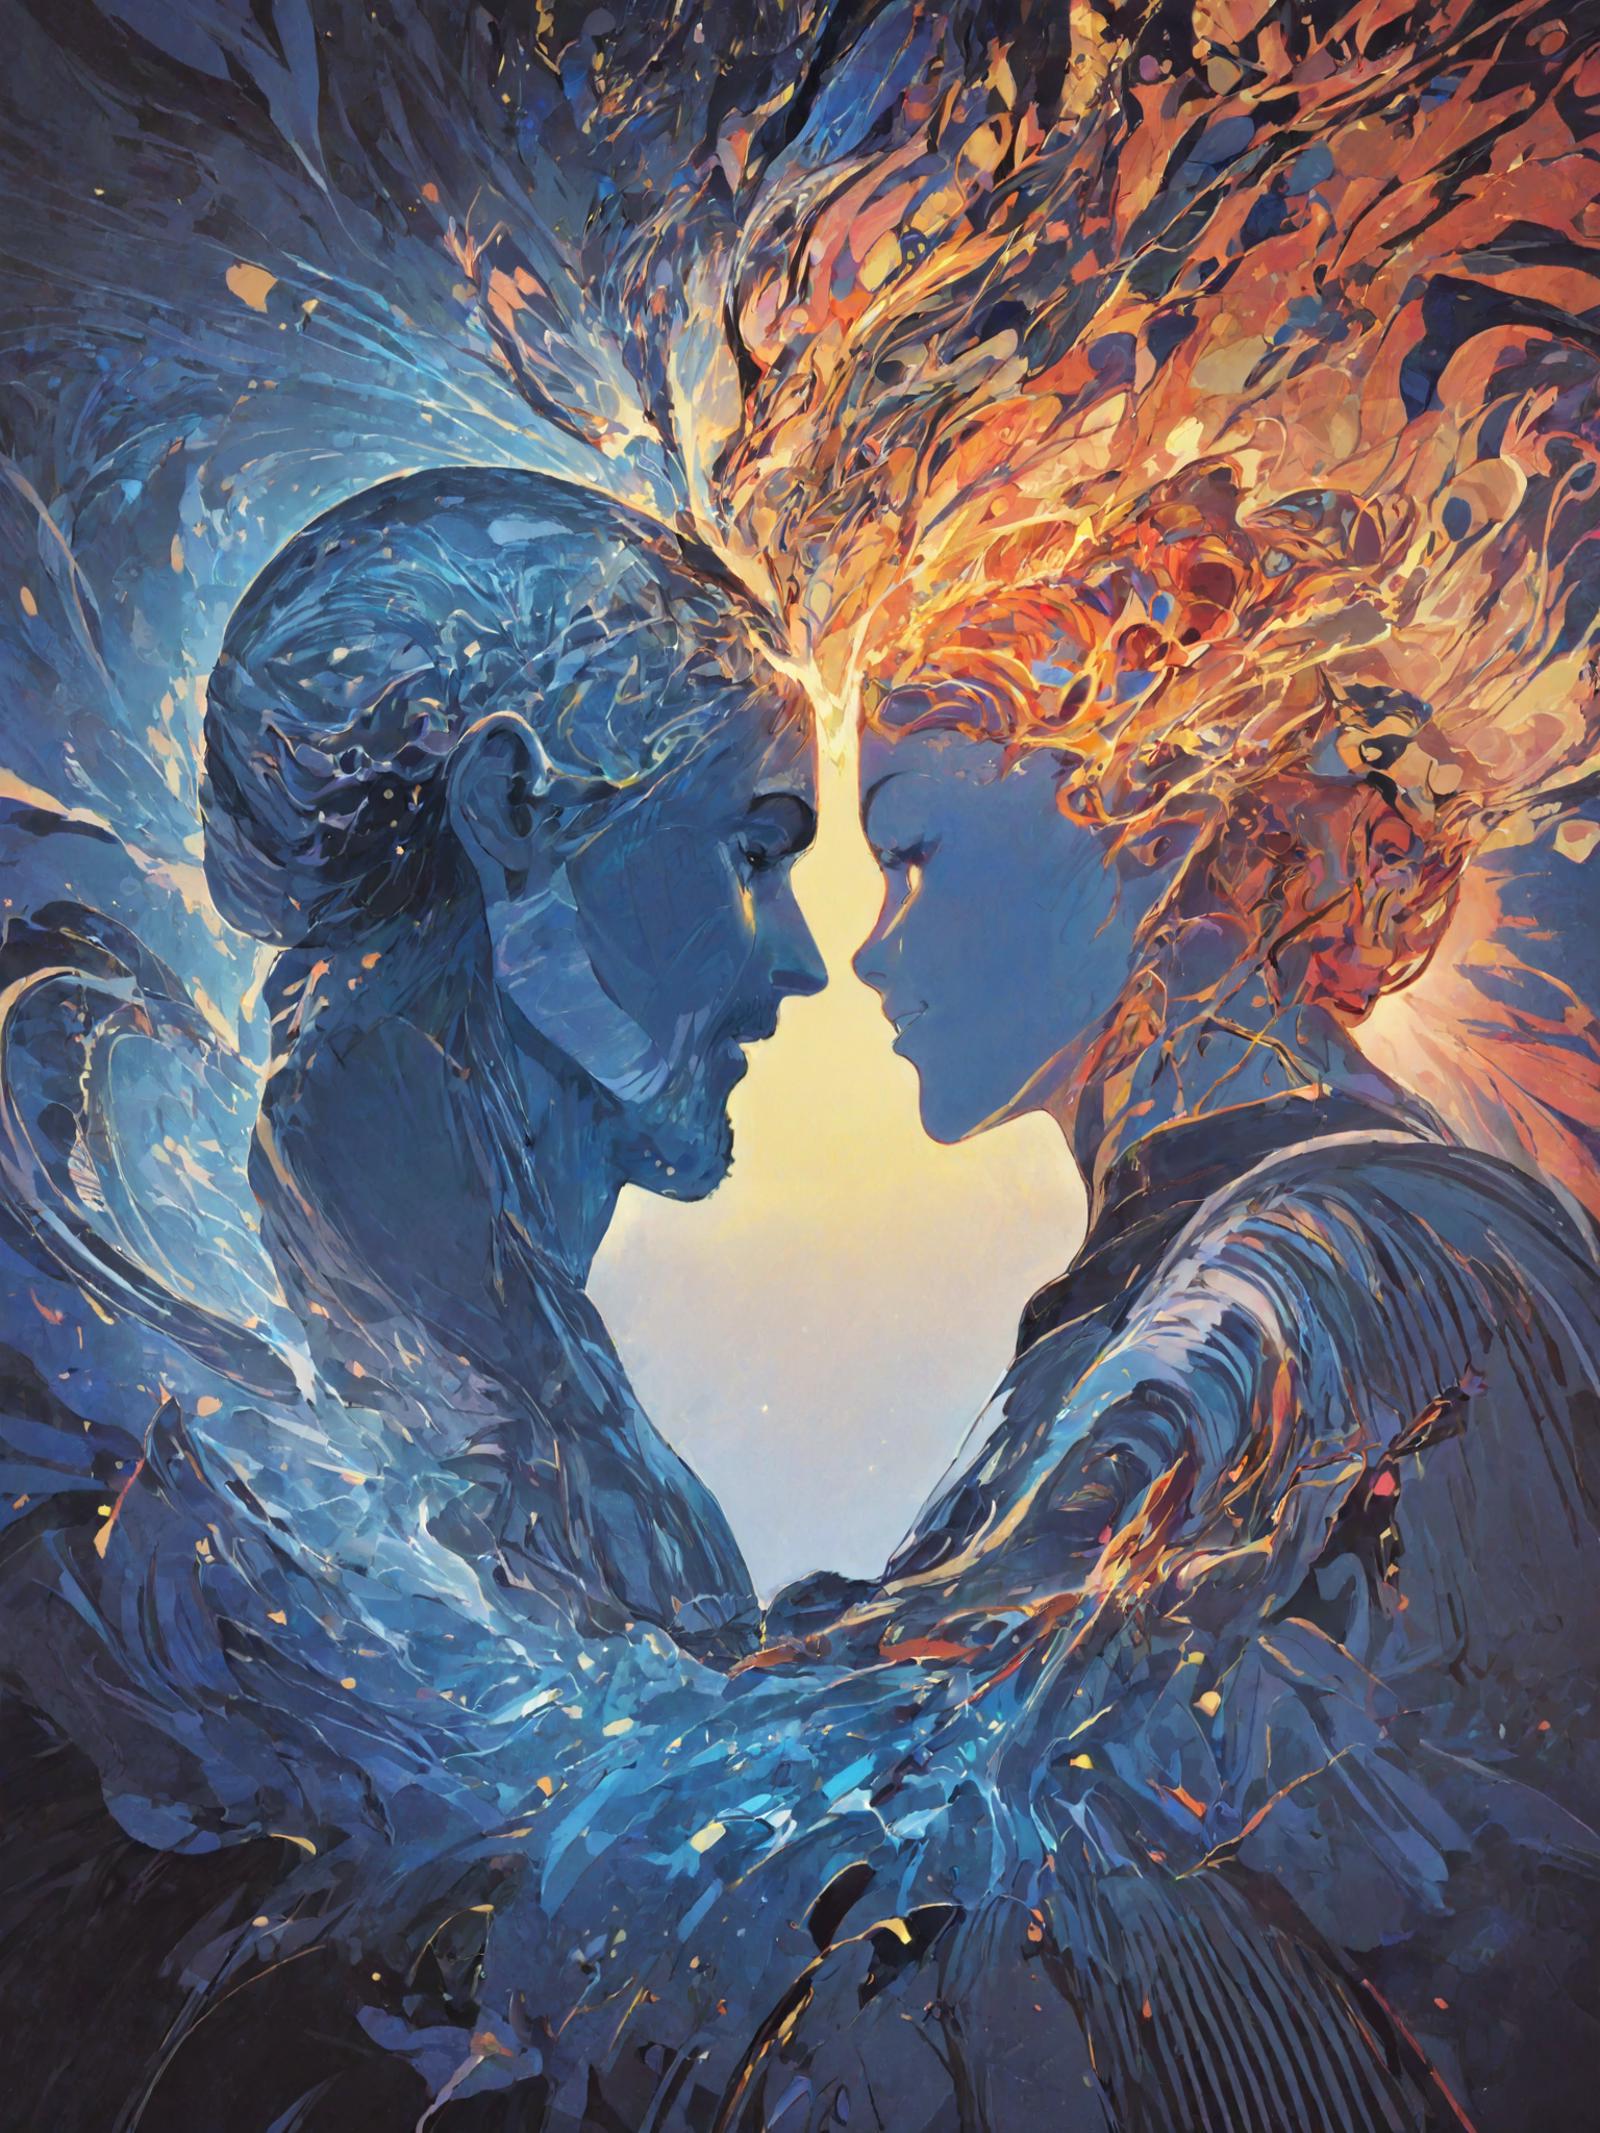 A painting of a man and a woman with their foreheads touching, surrounded by swirling blue and orange colors.